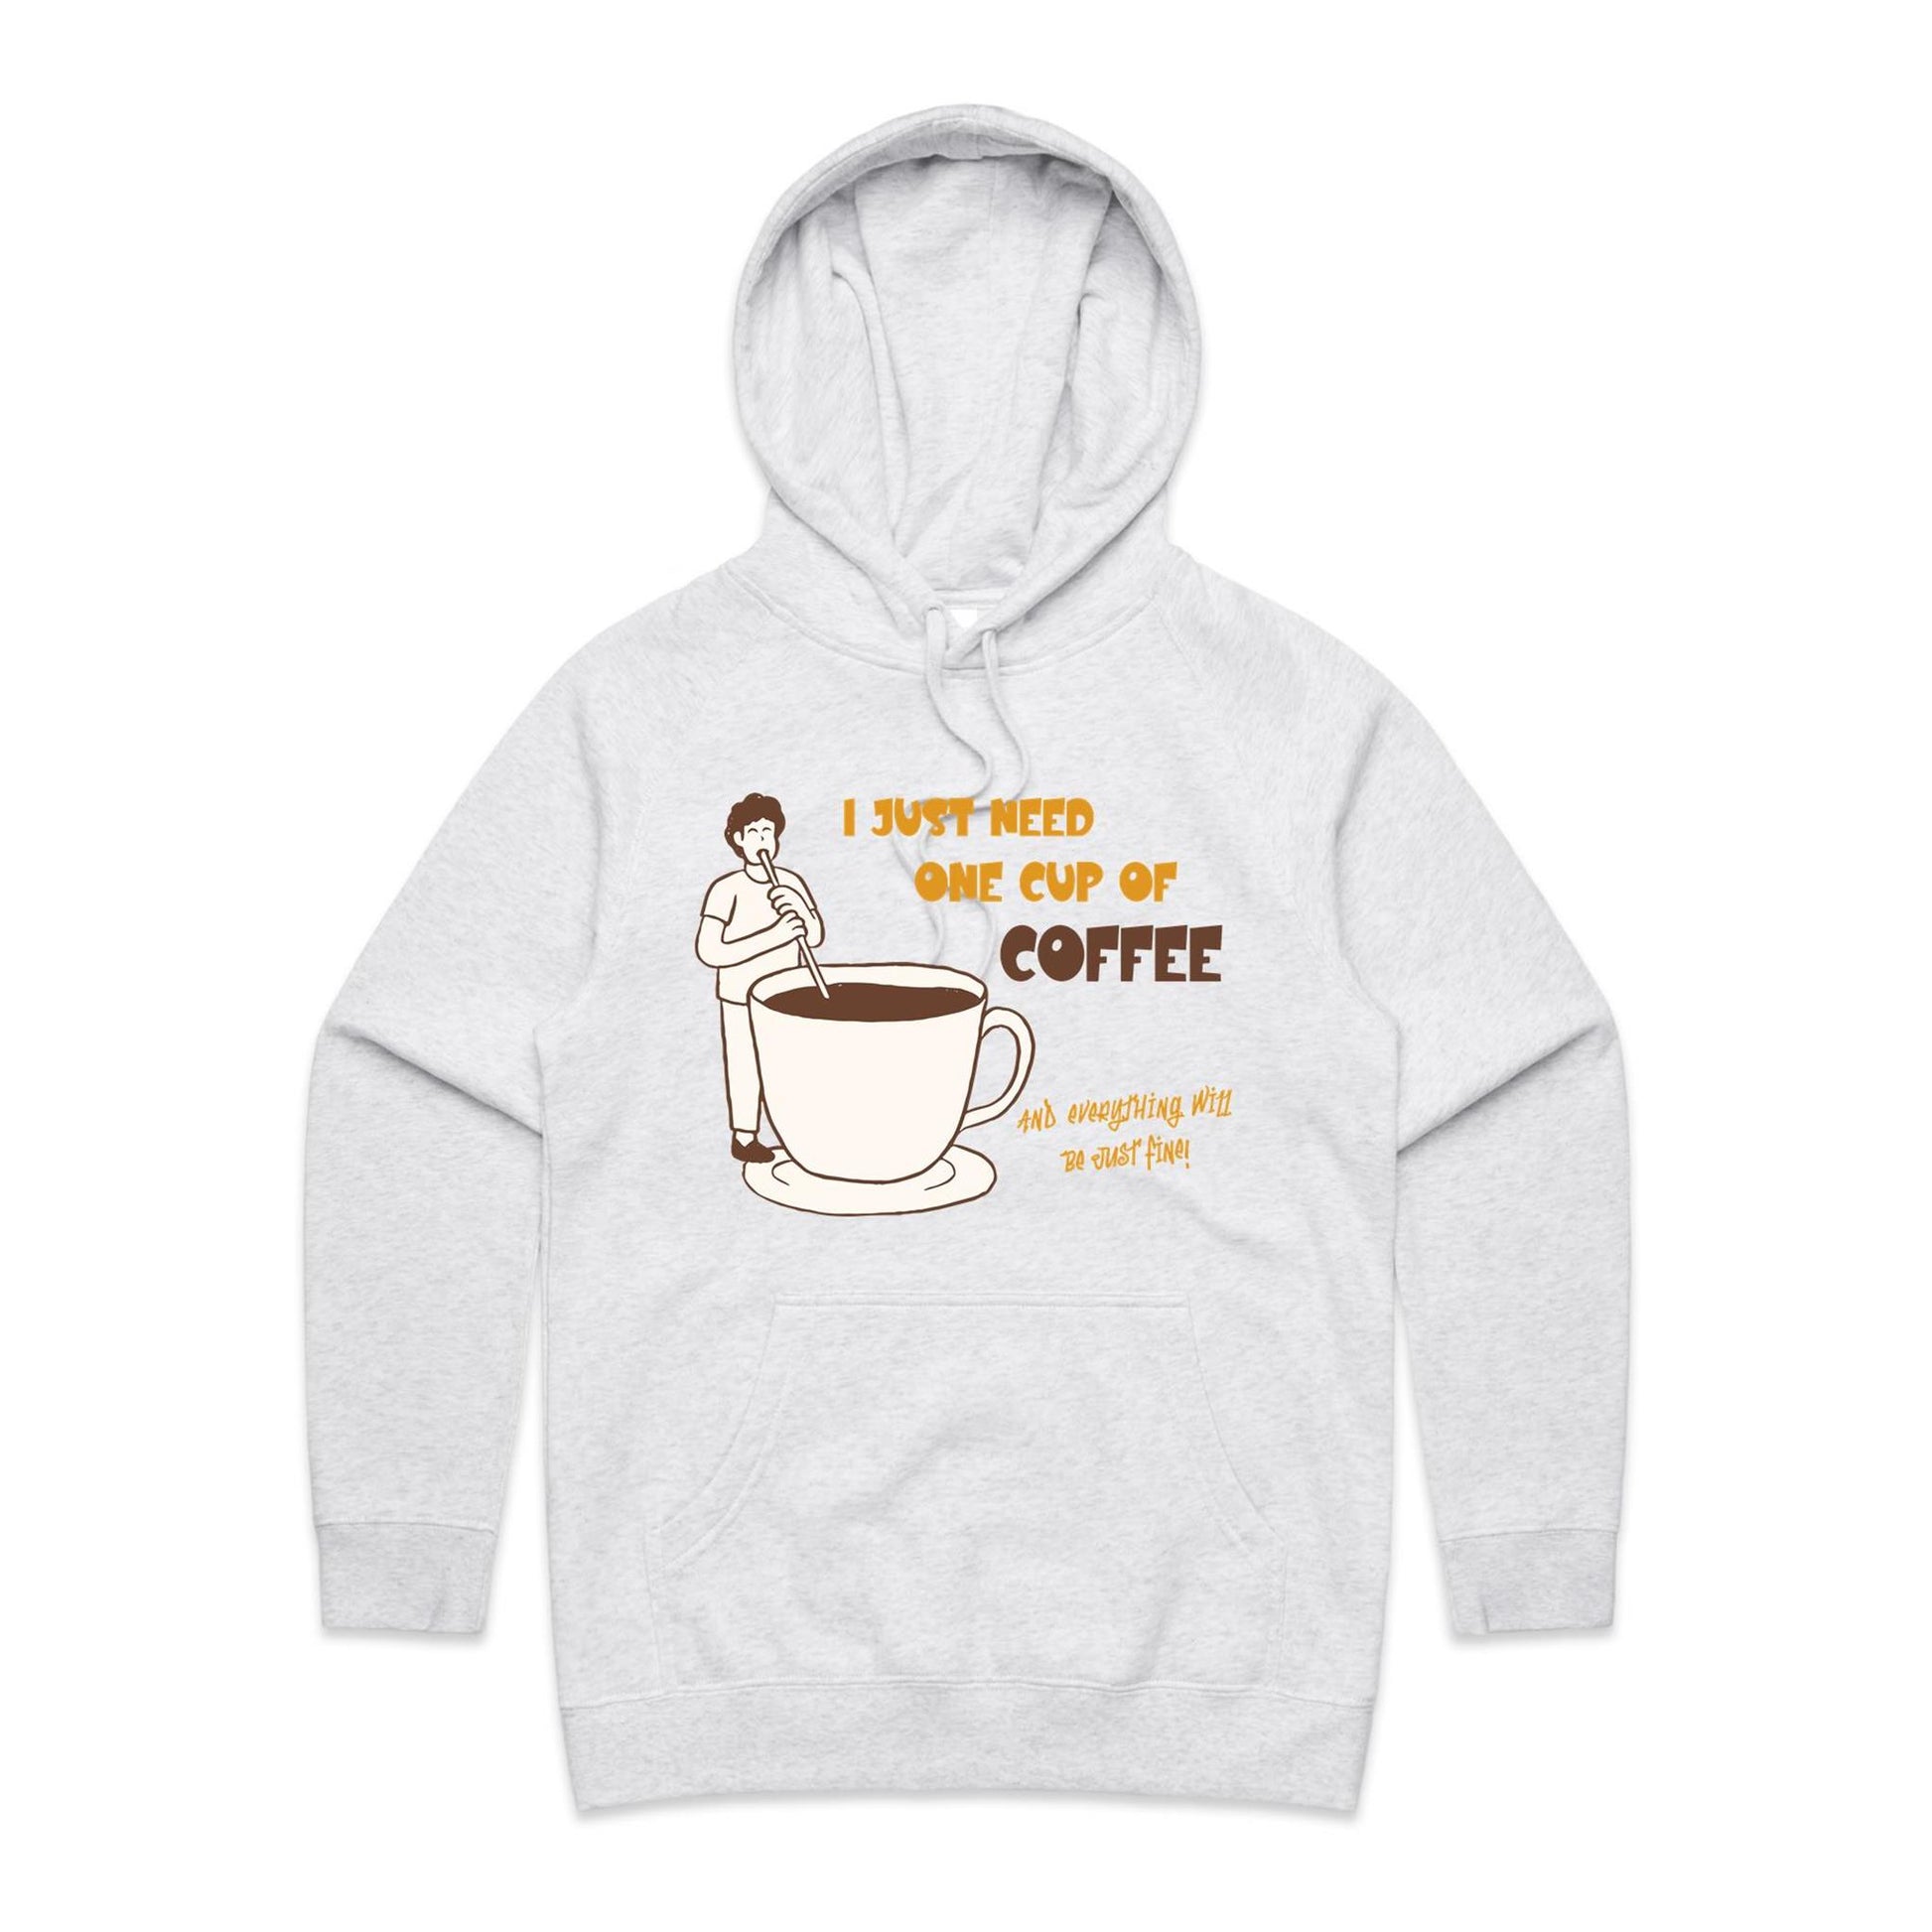 I Just Need One Cup Of Coffee And Everything Will Be Just Fine - Women's Supply Hood White Marle Womens Supply Hoodie Coffee